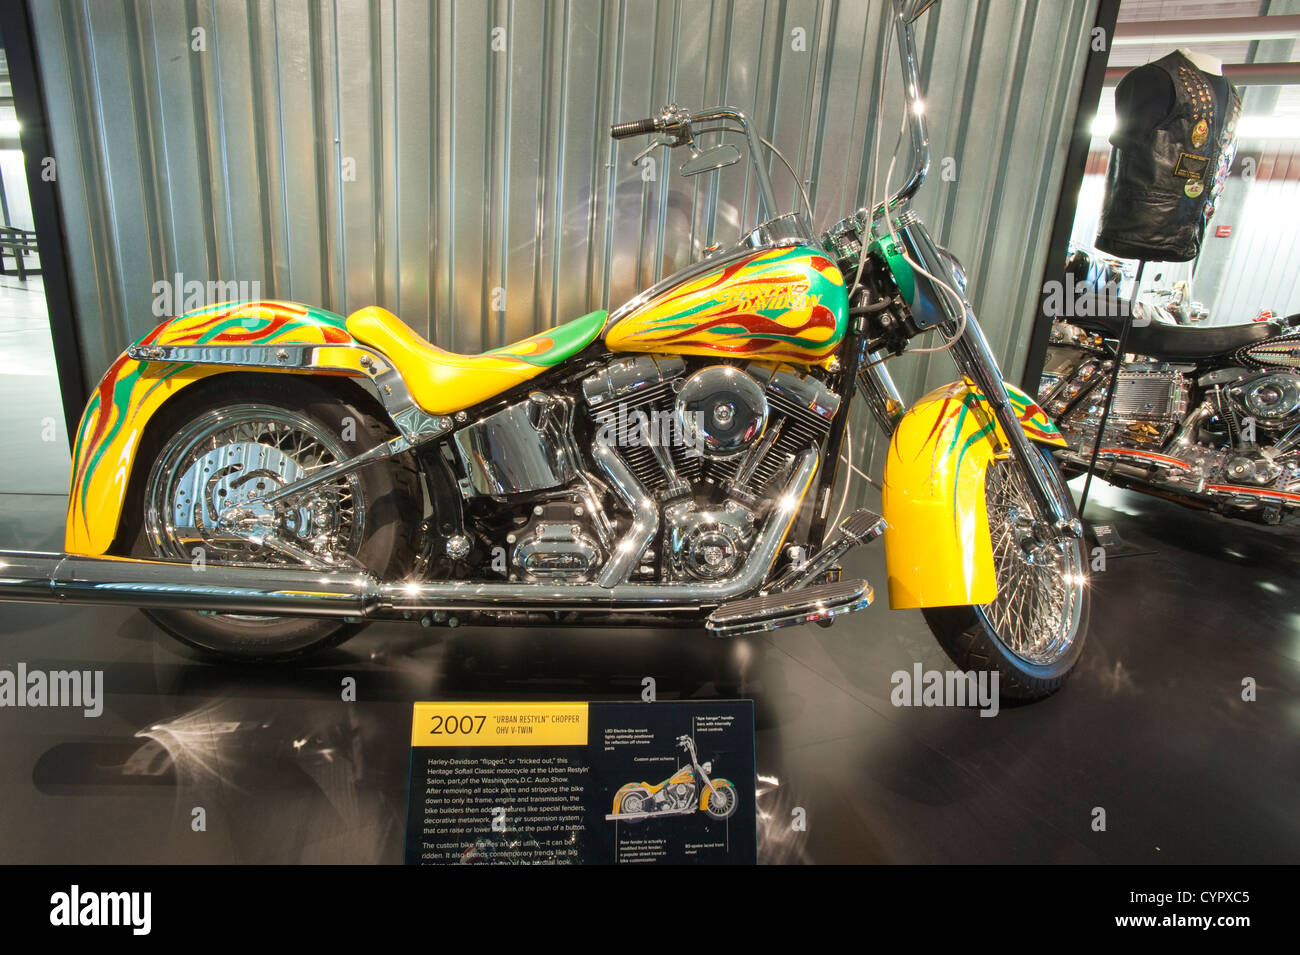 2007 urban restyle chopper ohv v twin motorcycle Harley Davidson Museum, Milwaukee, Wisconsin. Stock Photo